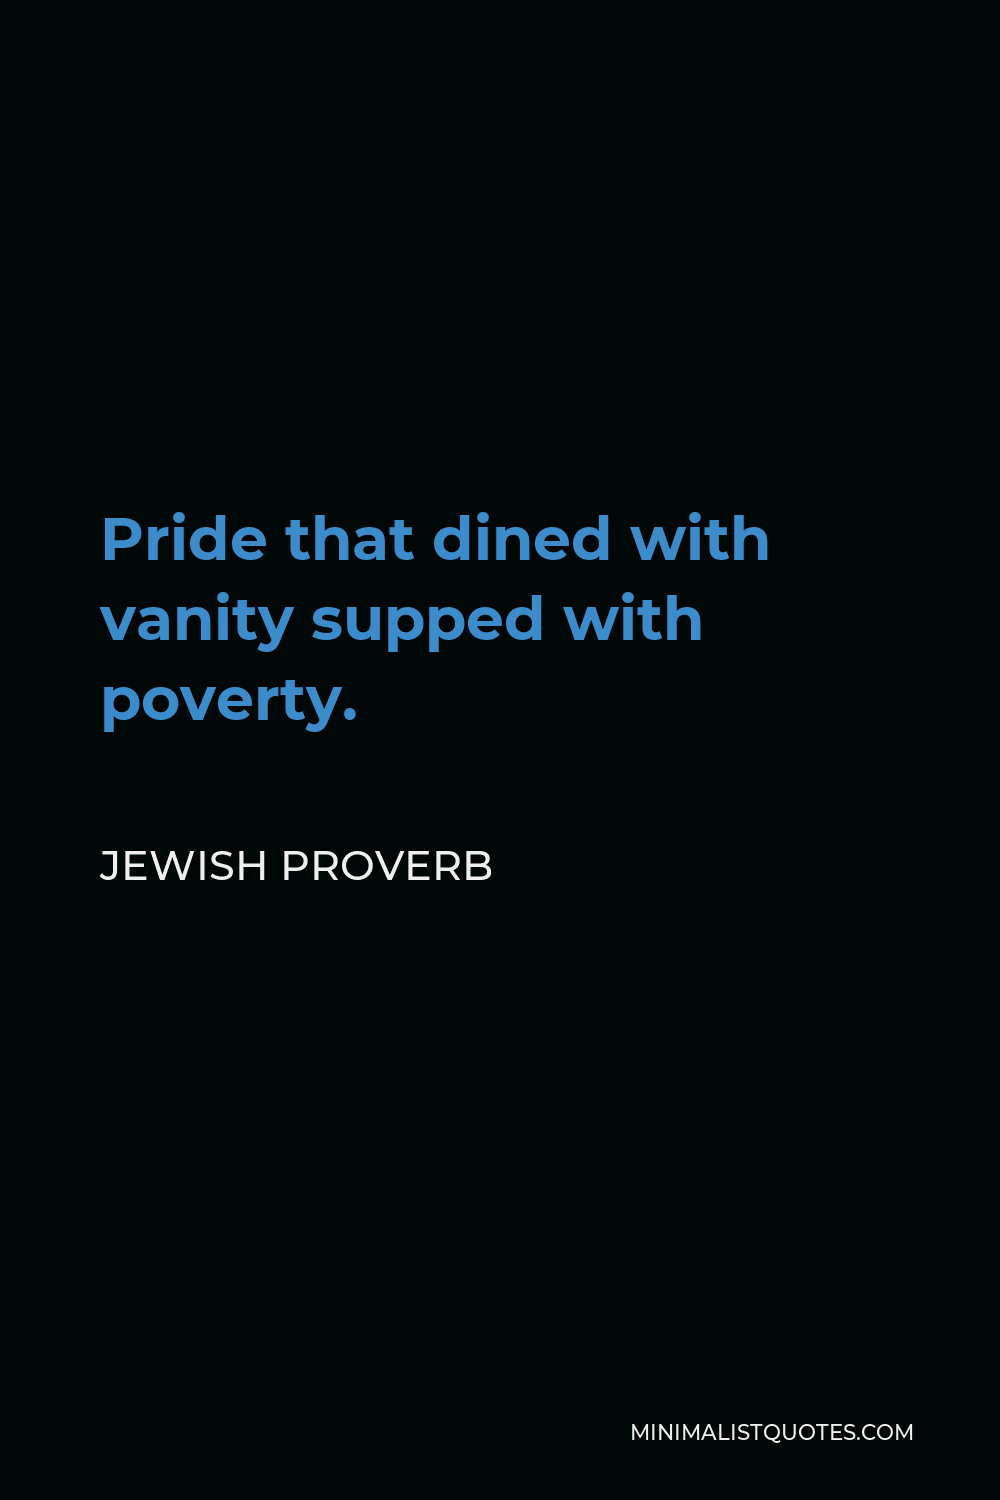 Jewish Proverb Quote - Pride that dined with vanity supped with poverty.